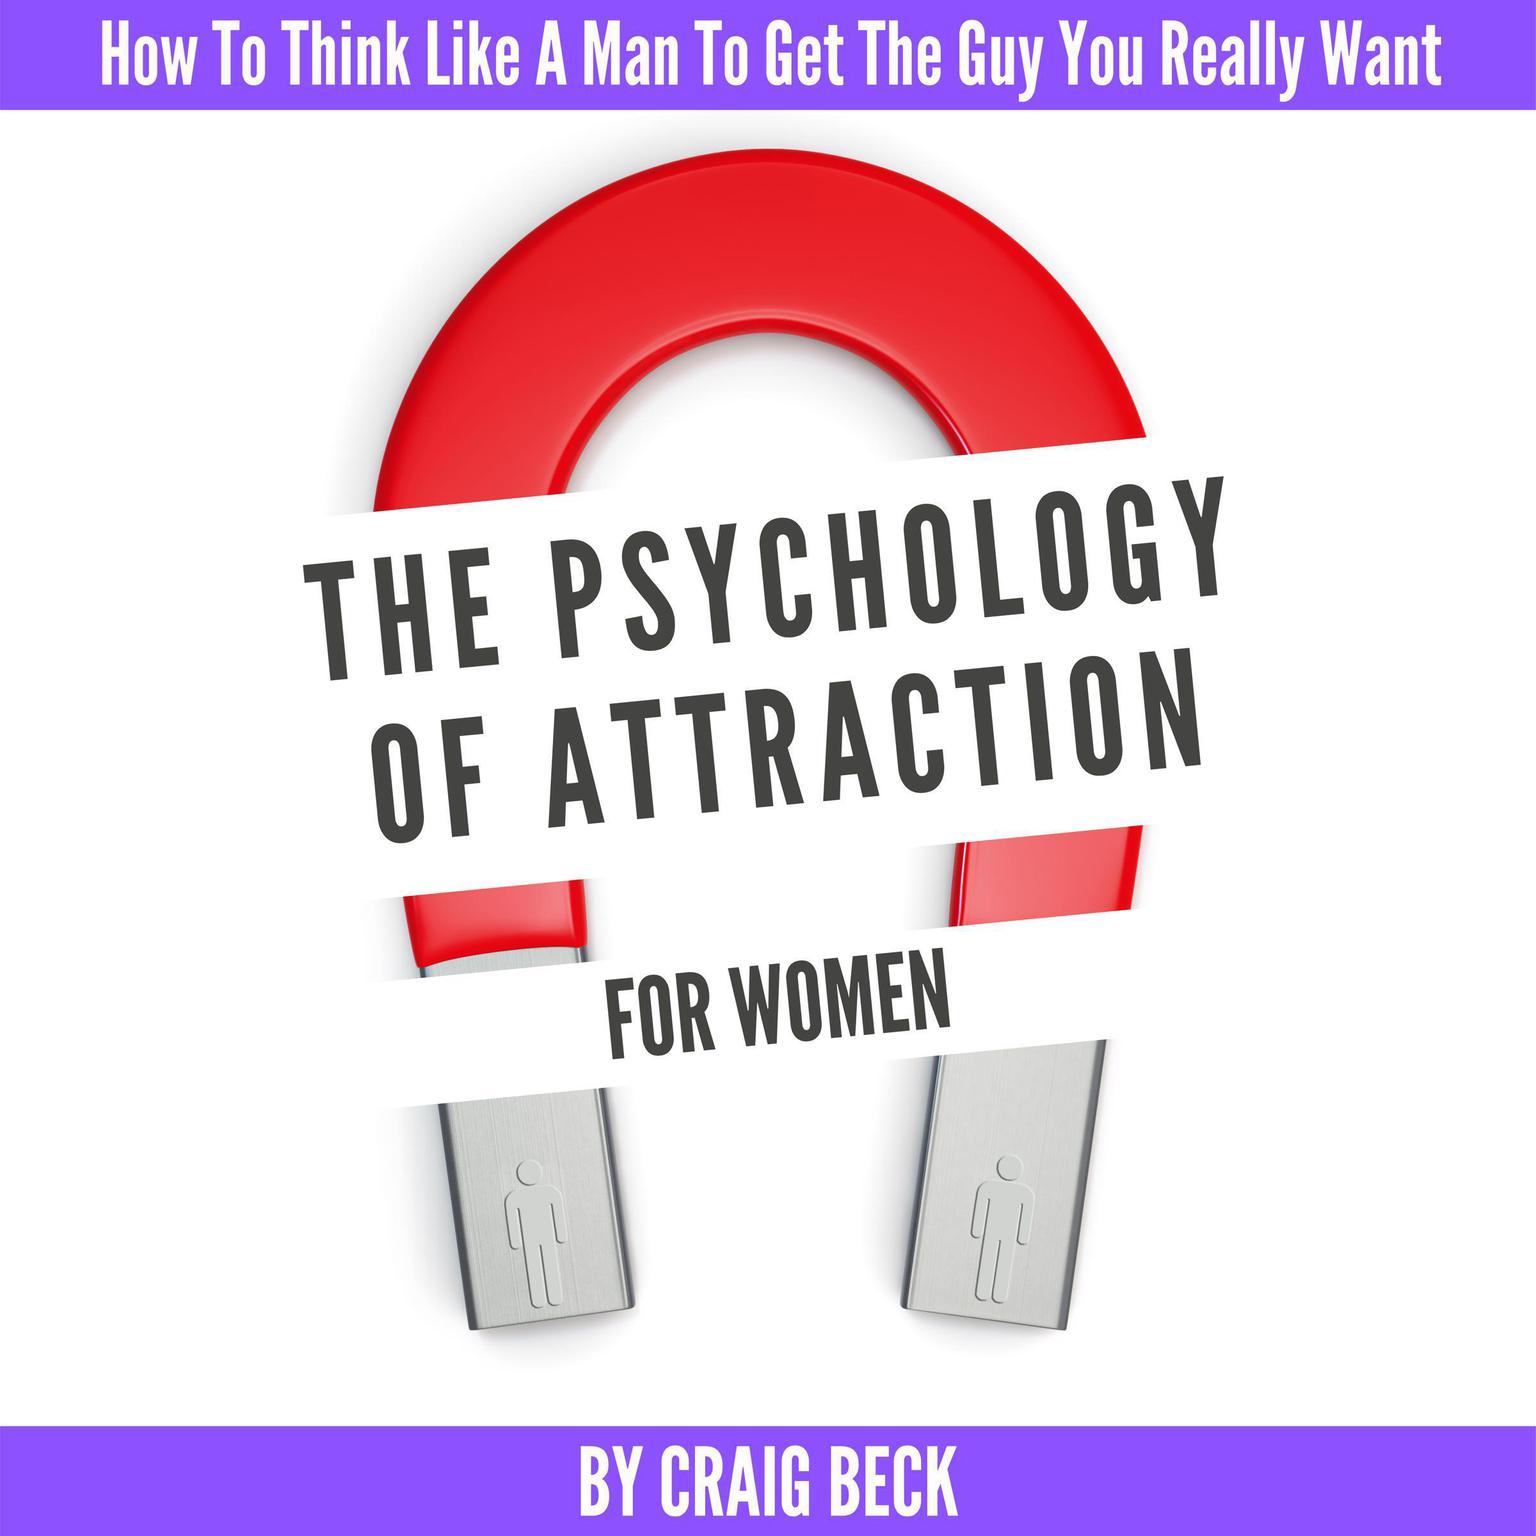 The Psychology Of Attraction For Women: How To Think Like A Man To Get The Guy You Really Want Audiobook, by Craig Beck